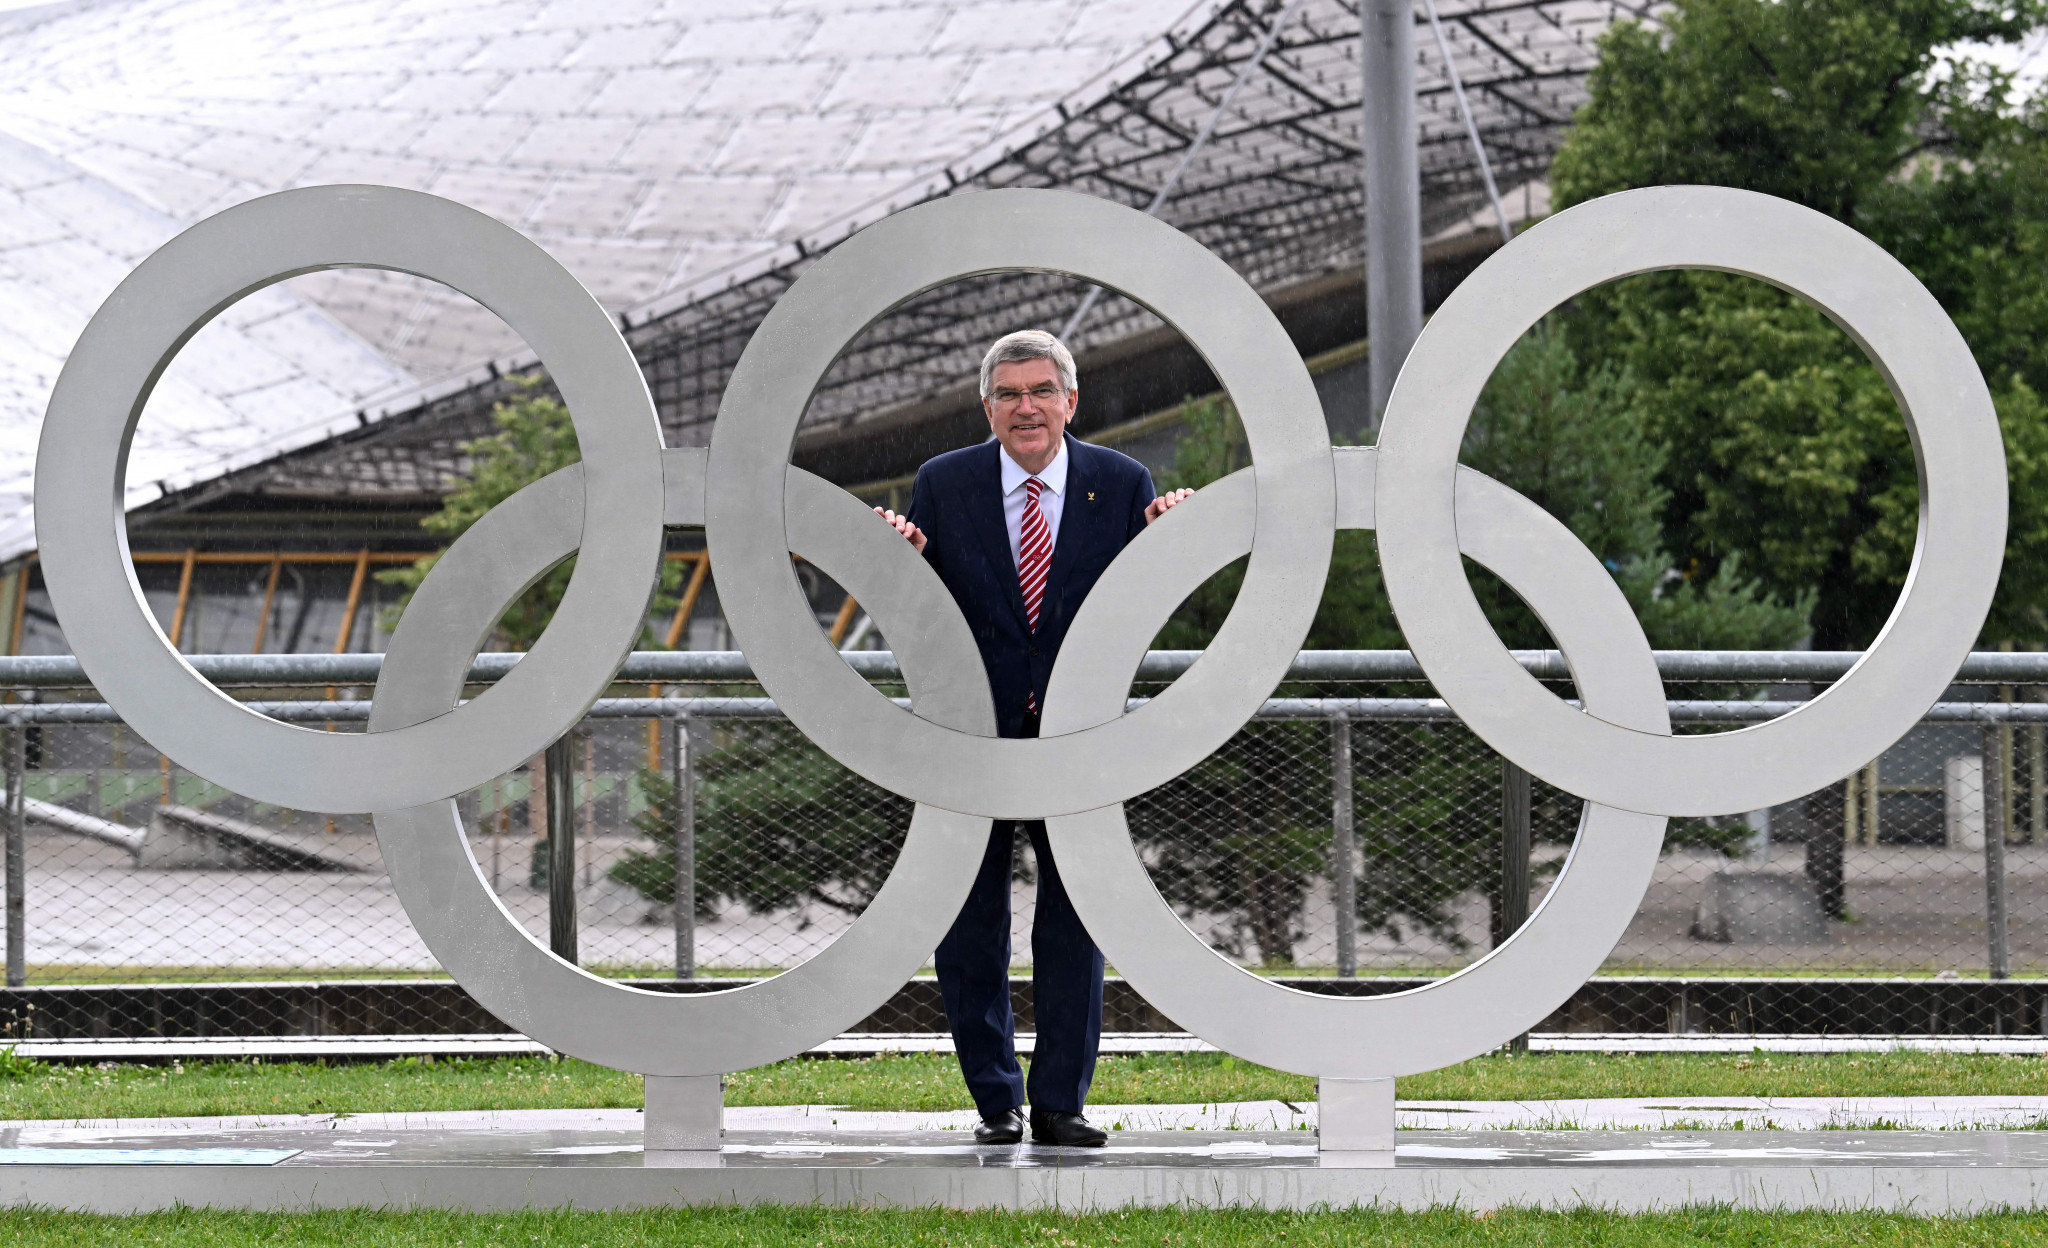 IOC President Thomas Bach did not participate in 1972 but has praised the Munich Games  ©Getty Images